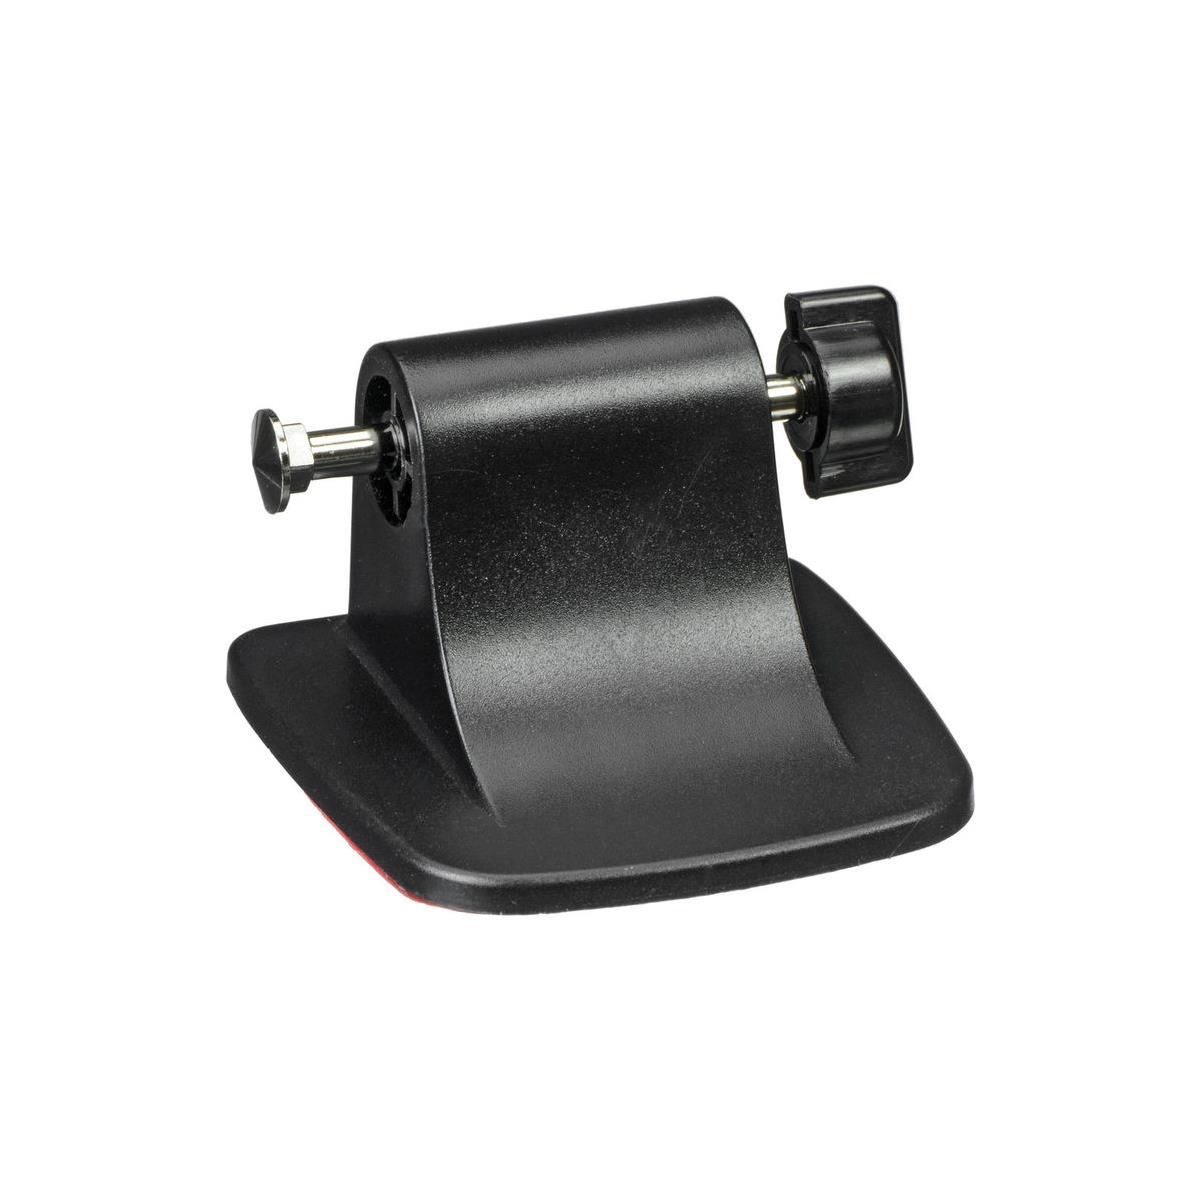 Image of KJB Security Products Adhesive Mount for DP-210 and DP-210WH Car Cameras